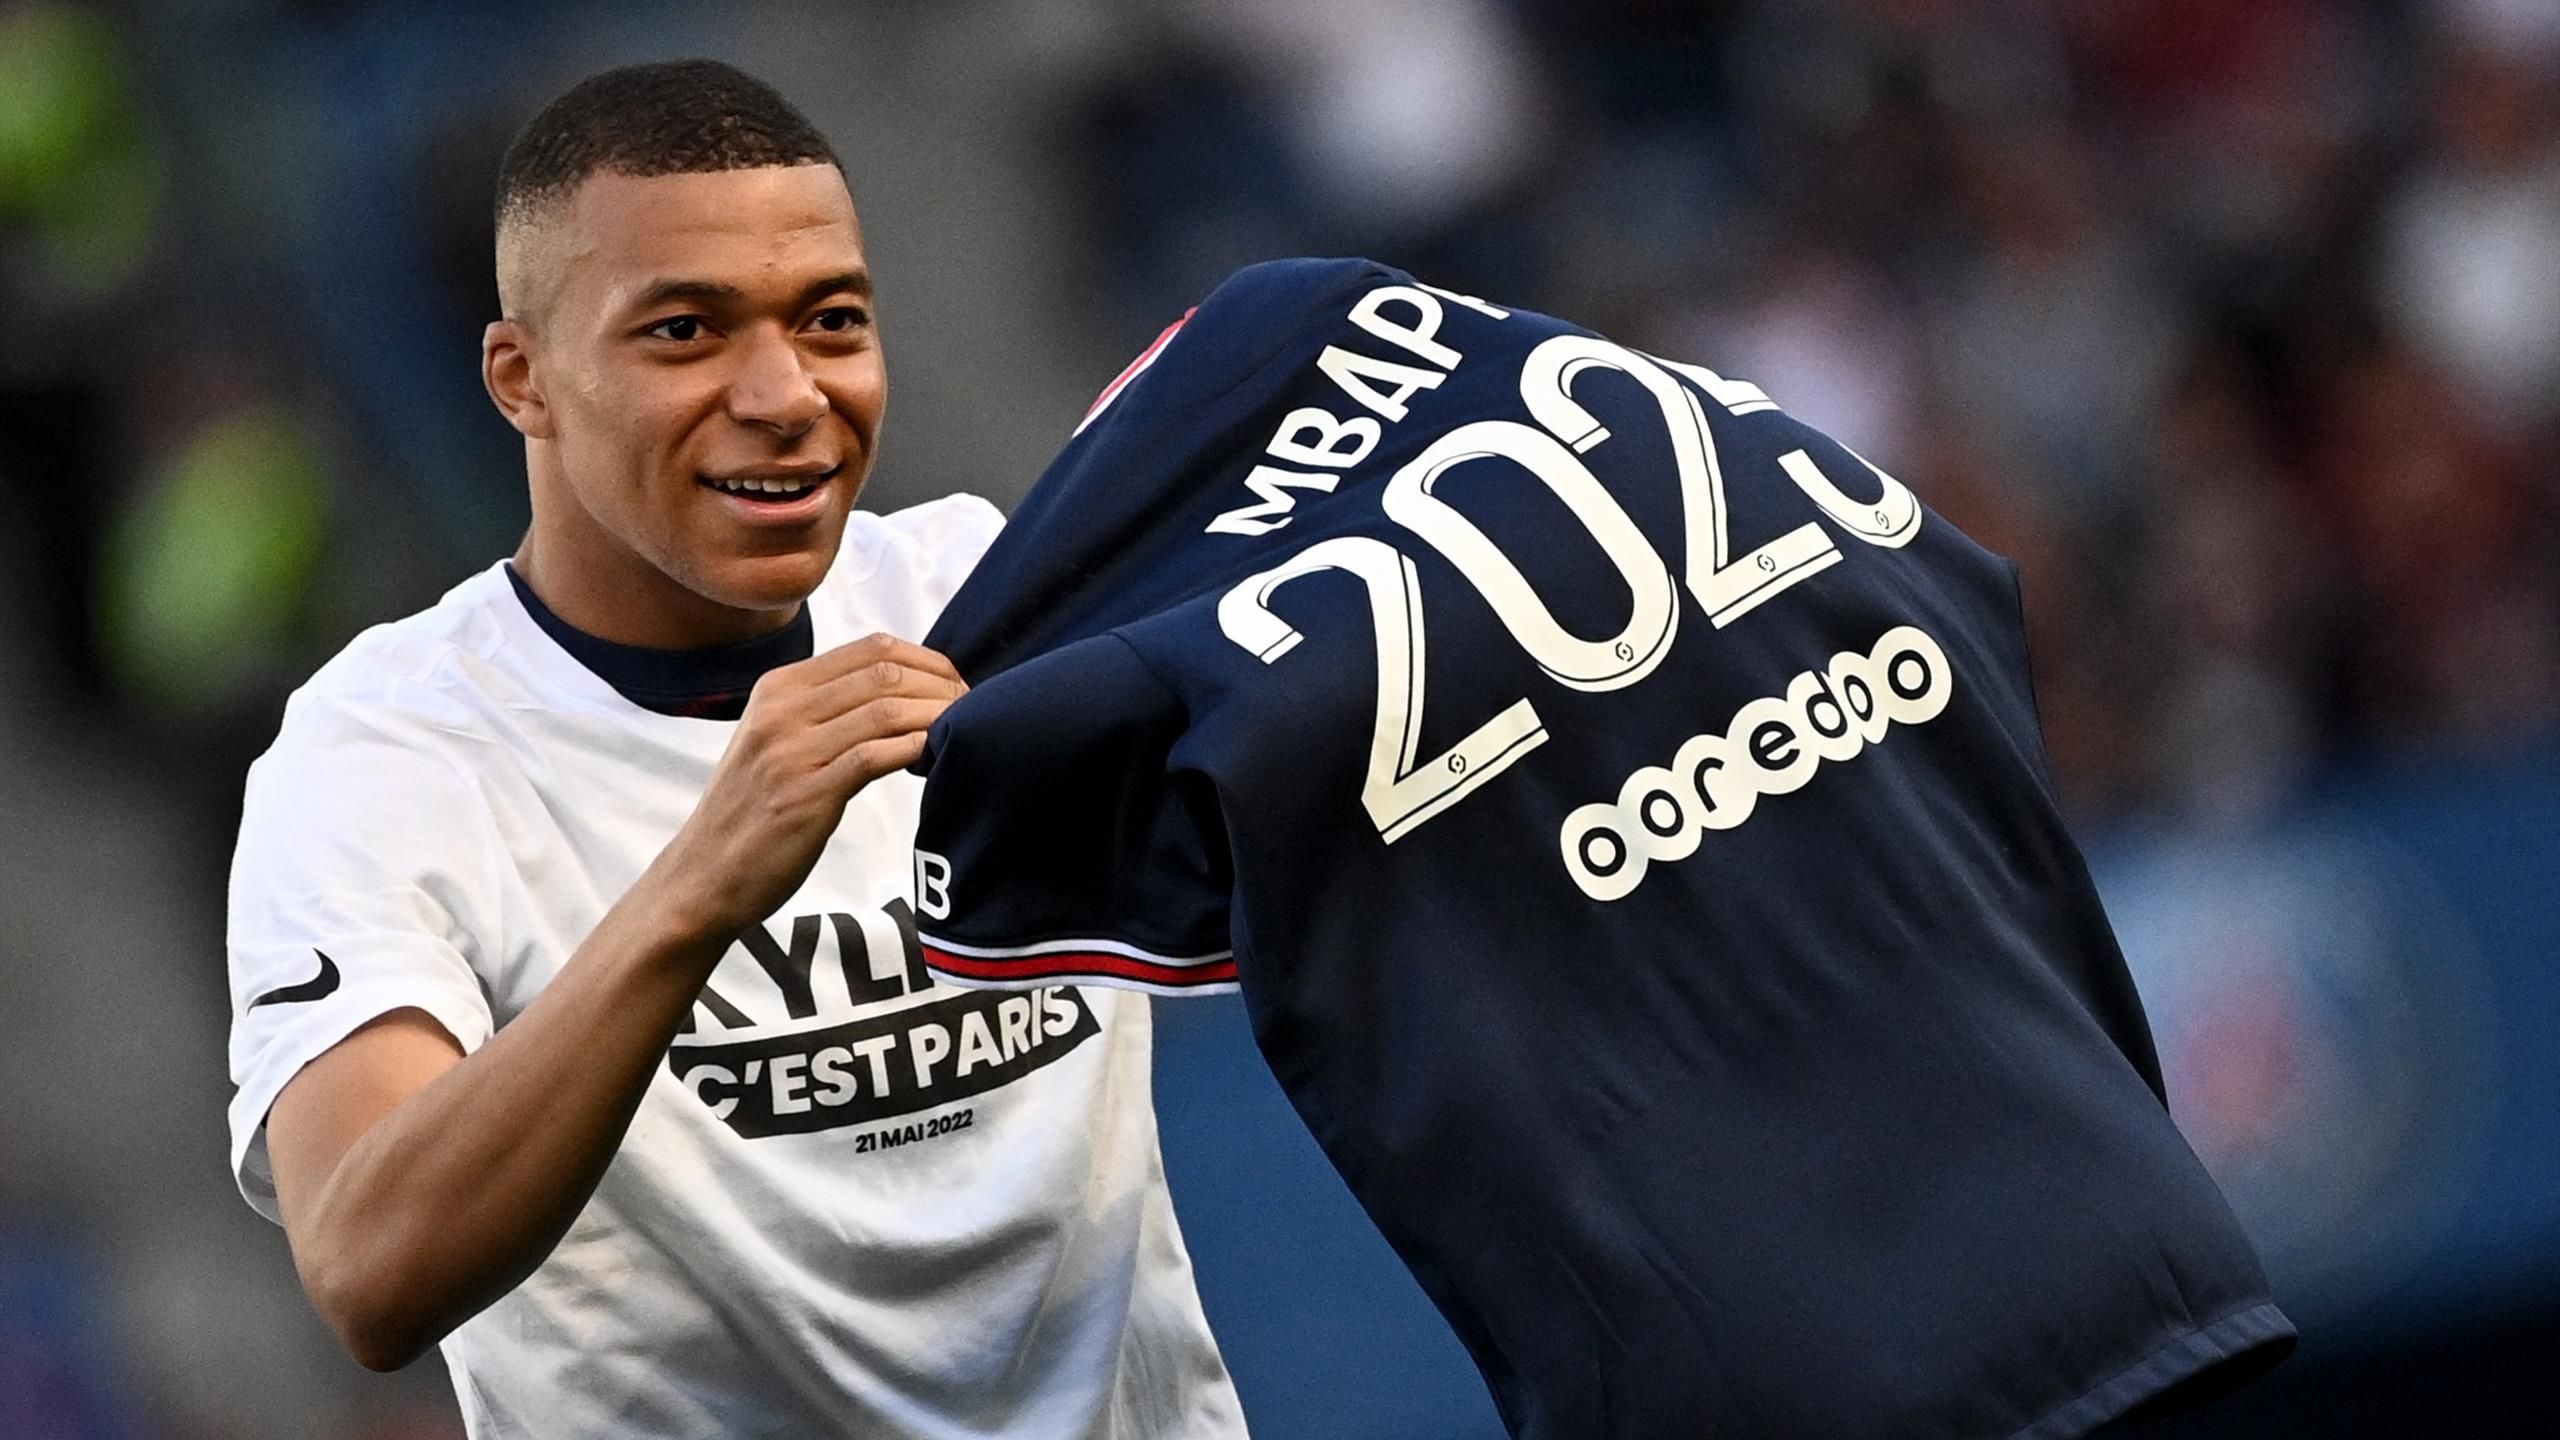 Kylian Mbappé's new contract makes him the most powerful figure at